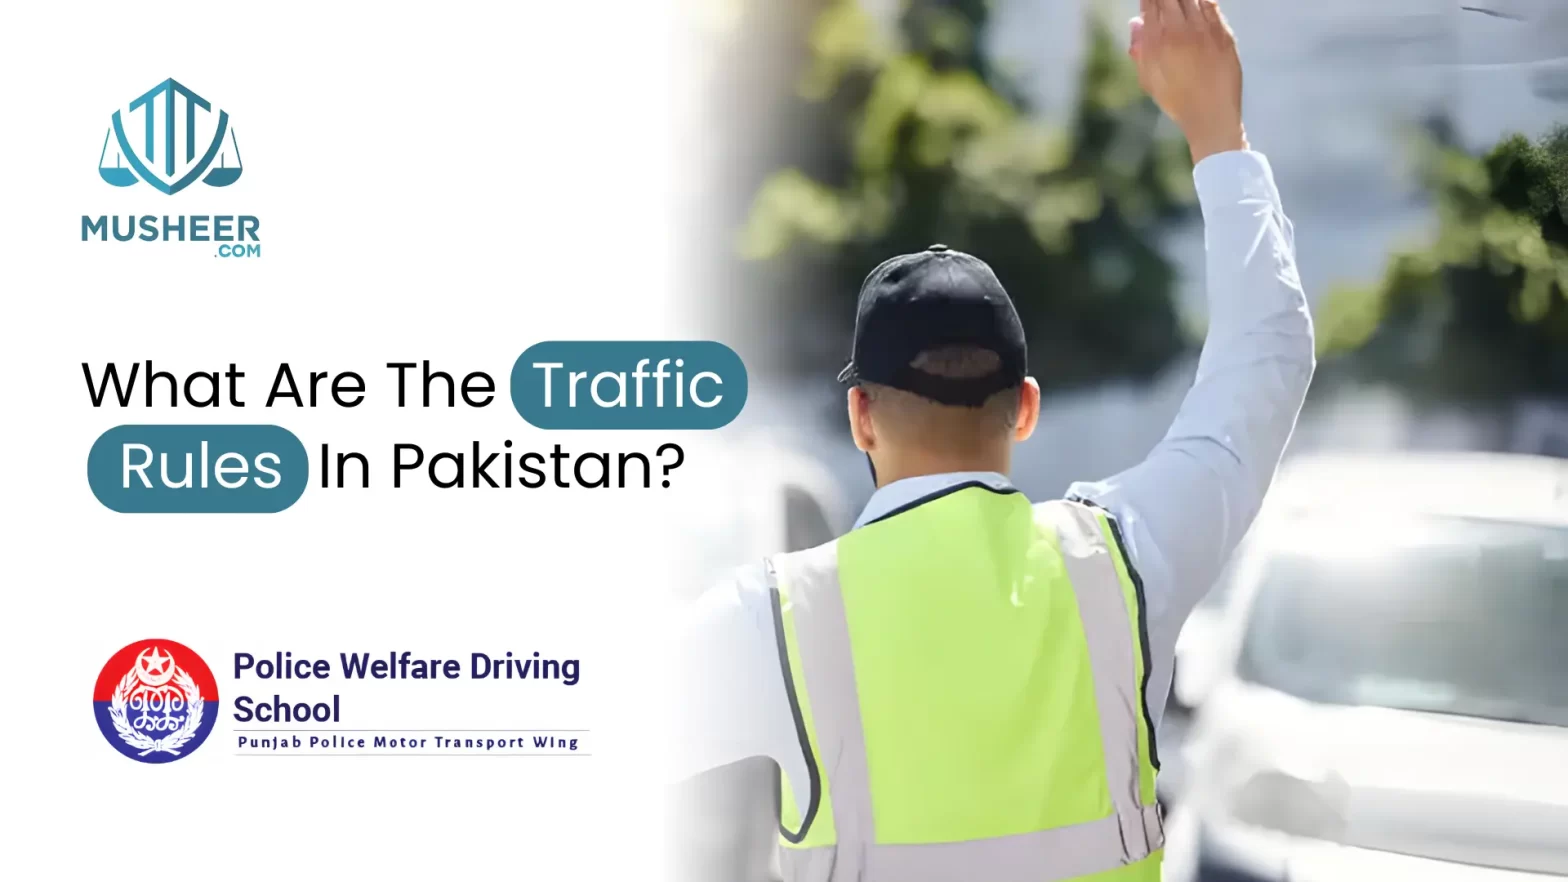 What Are The Traffic Rules In Pakistan